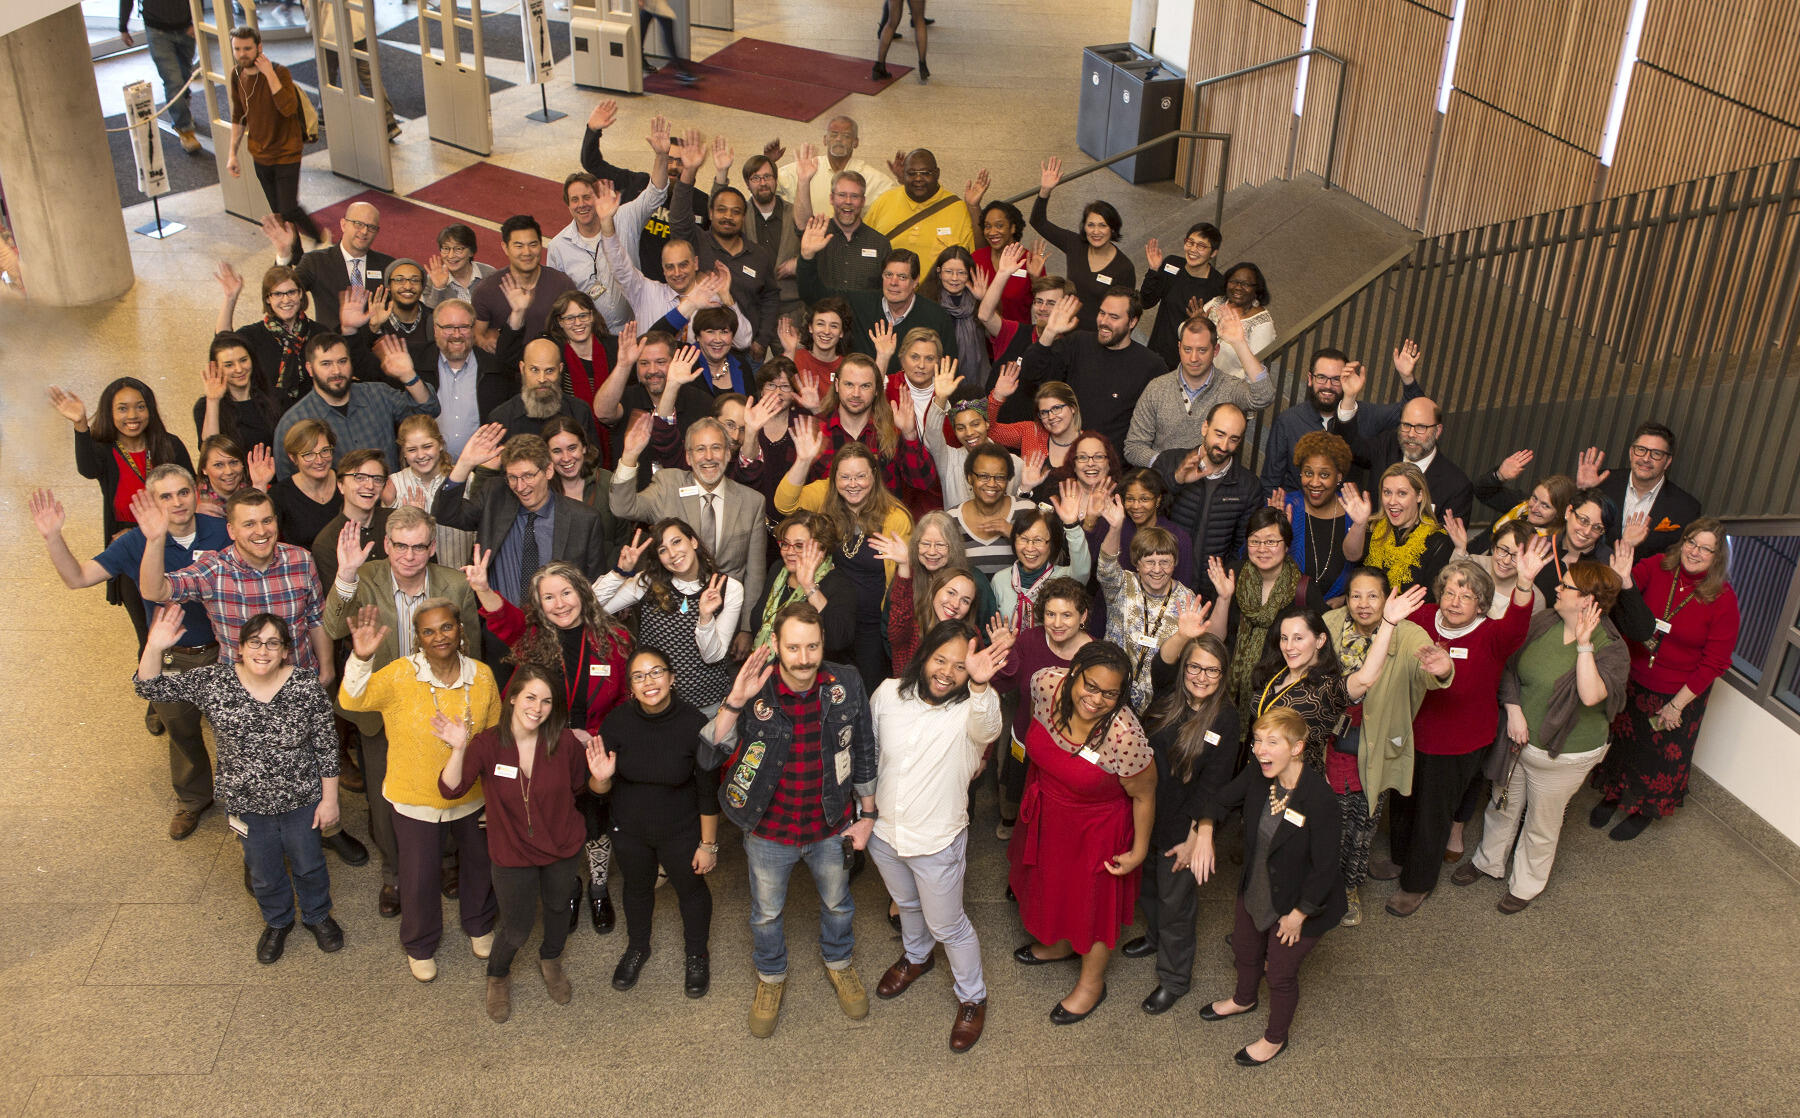 Staff from VCU Libraries pose for a photo in the lobby at James Branch Cabell Library. <br>Photo by Jay Paul